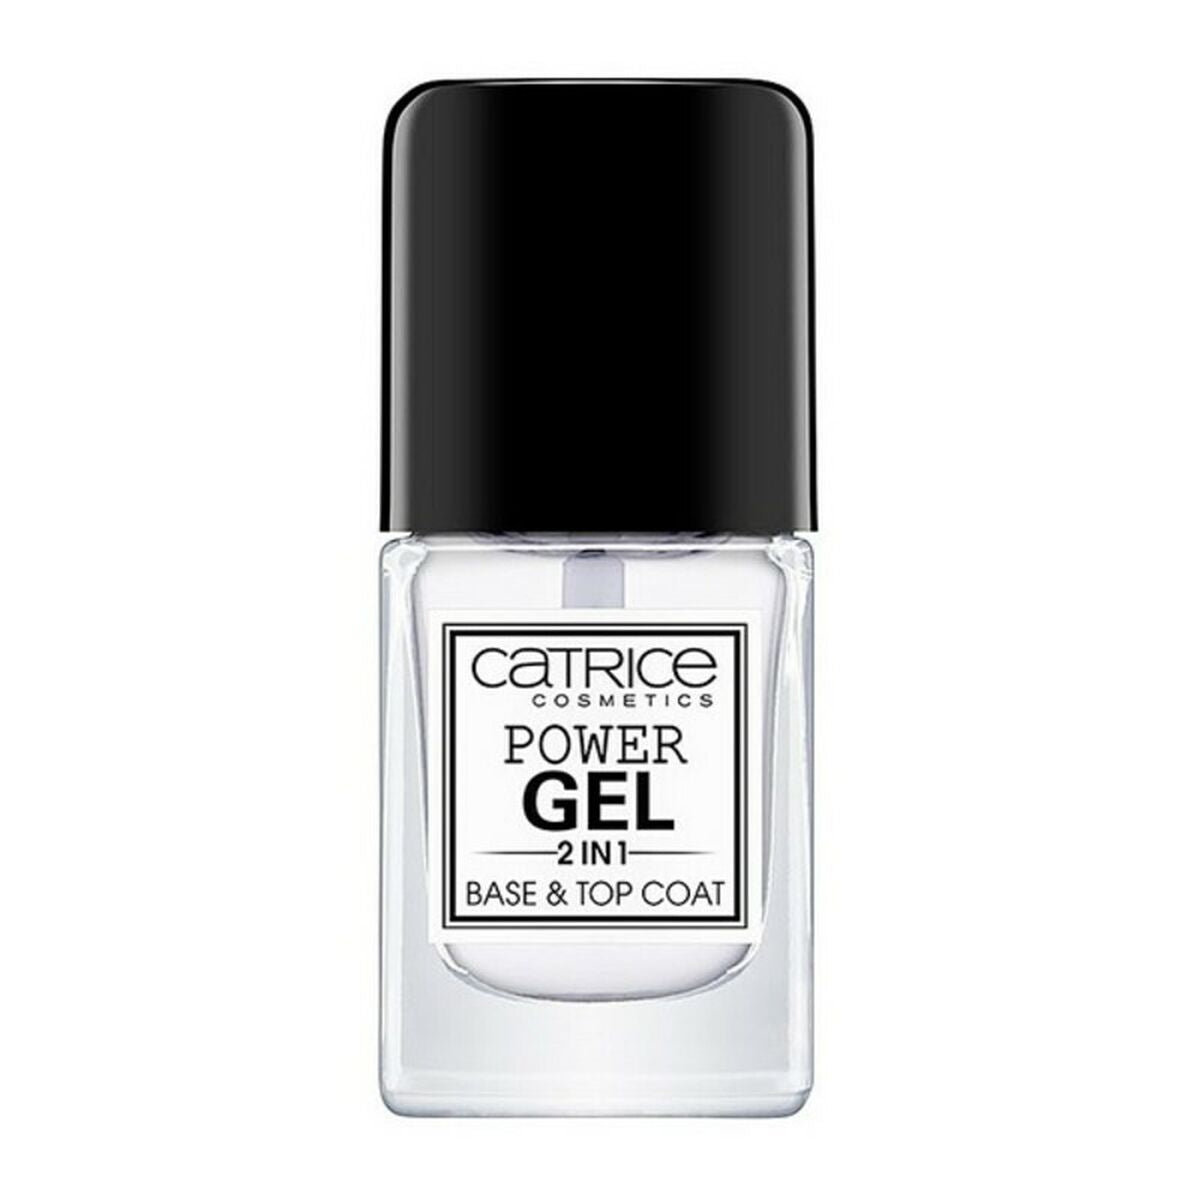 Nagellack Power Gel 2 in 1 Base and Top Coat Catrice (10,5 ml) (10,5 ml)